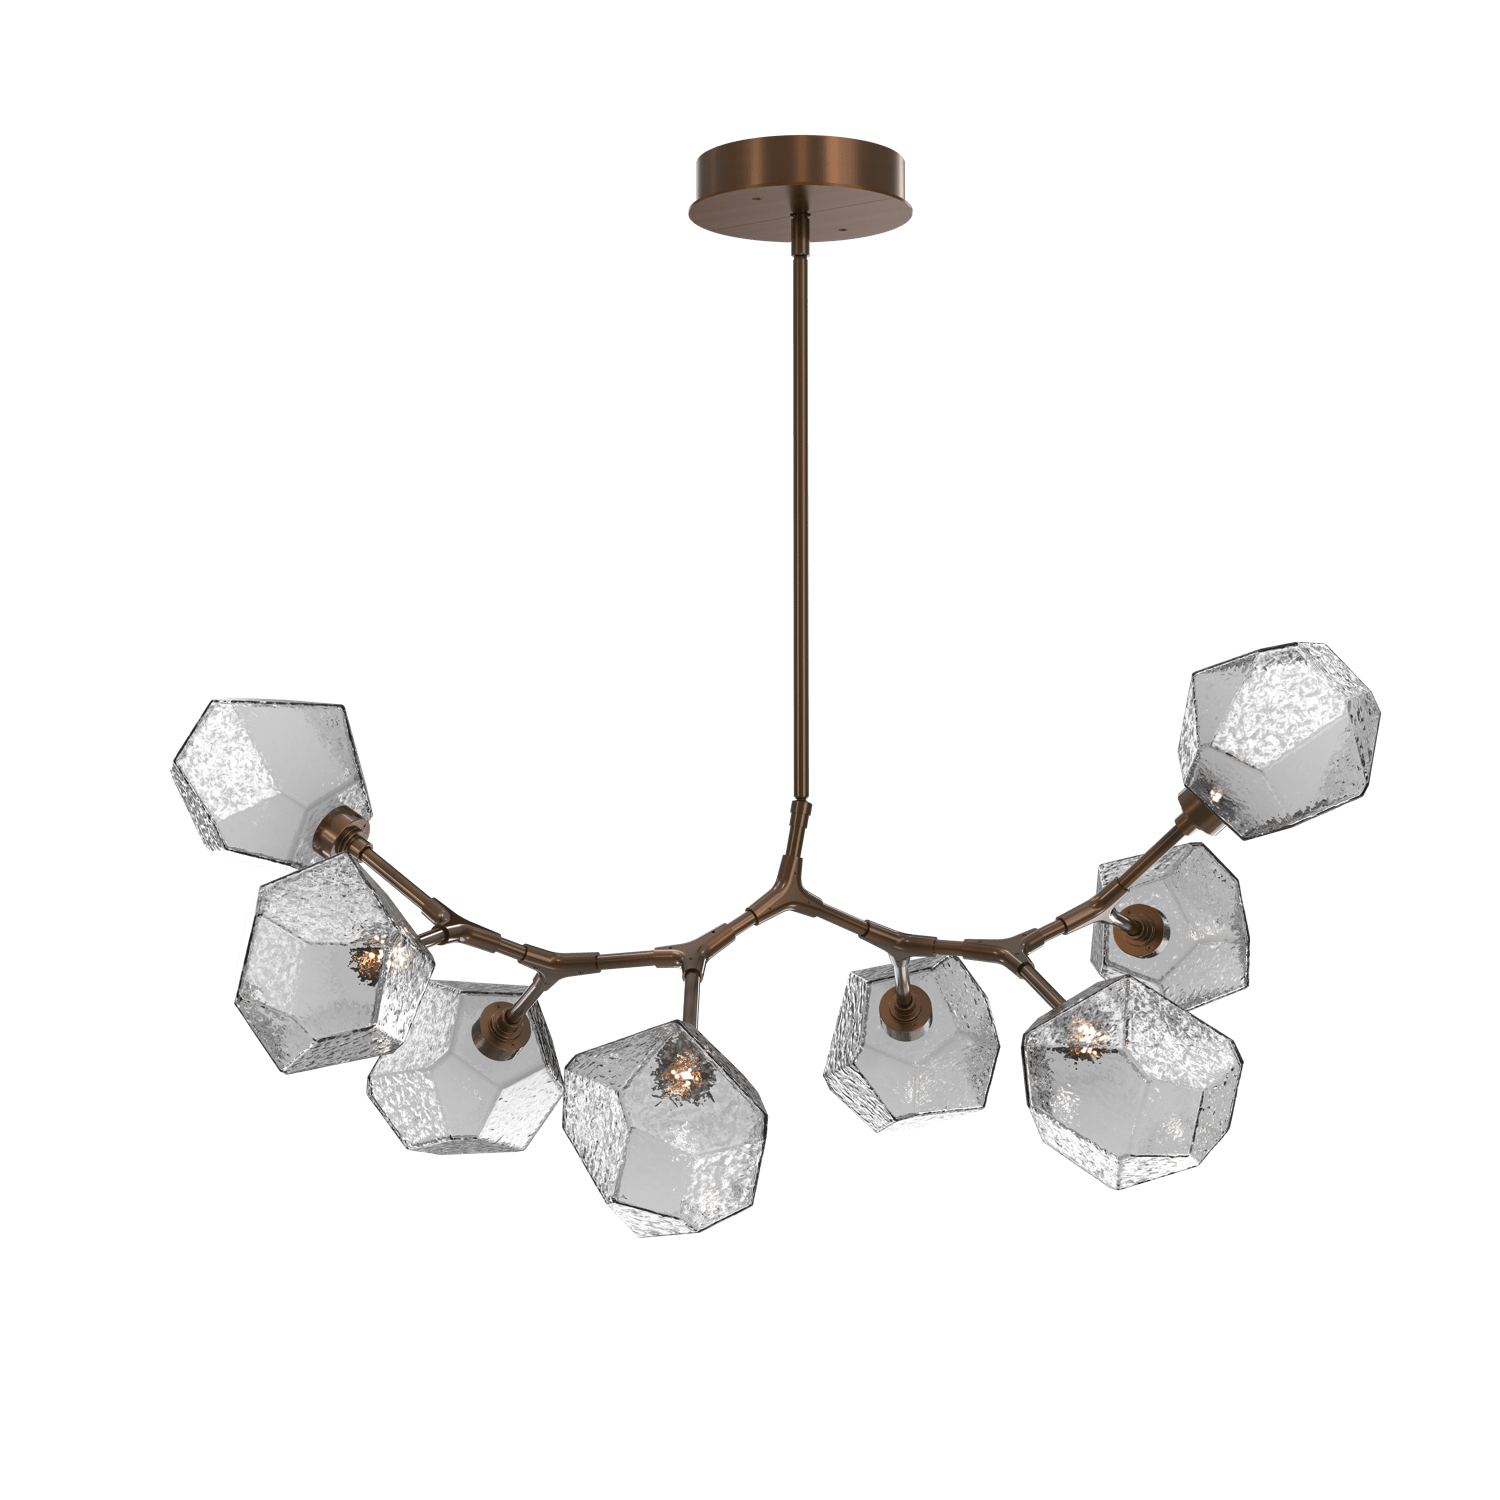 PLB0039-BB-RB-C-Hammerton-Studio-Gem-8-light-modern-branch-chandelier-with-oil-rubbed-bronze-finish-and-clear-blown-glass-shades-and-LED-lamping